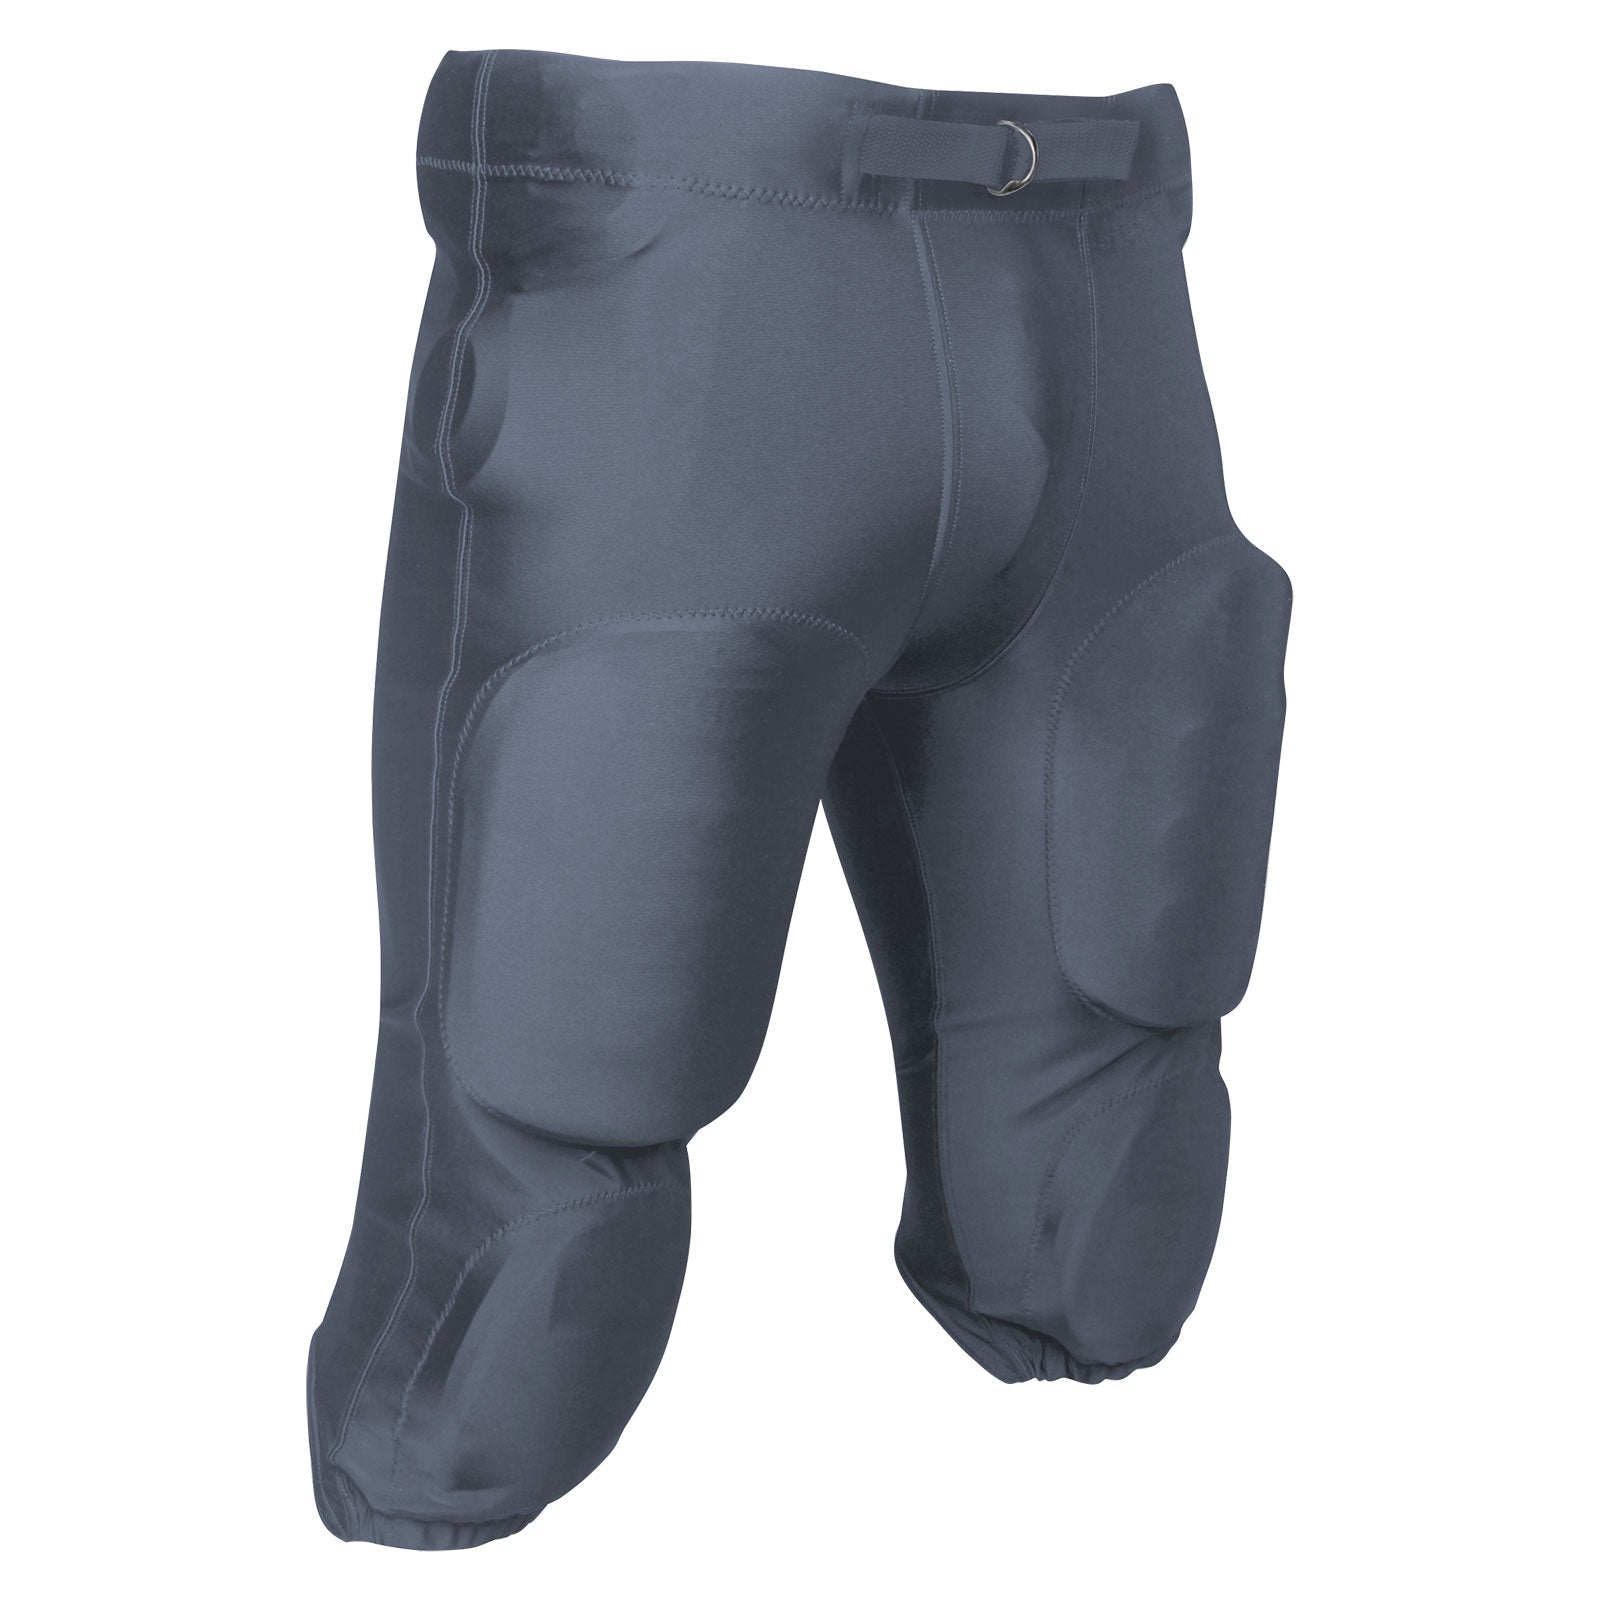 Traditional Football Pant With Pad Pockets GRAPHITE BODY